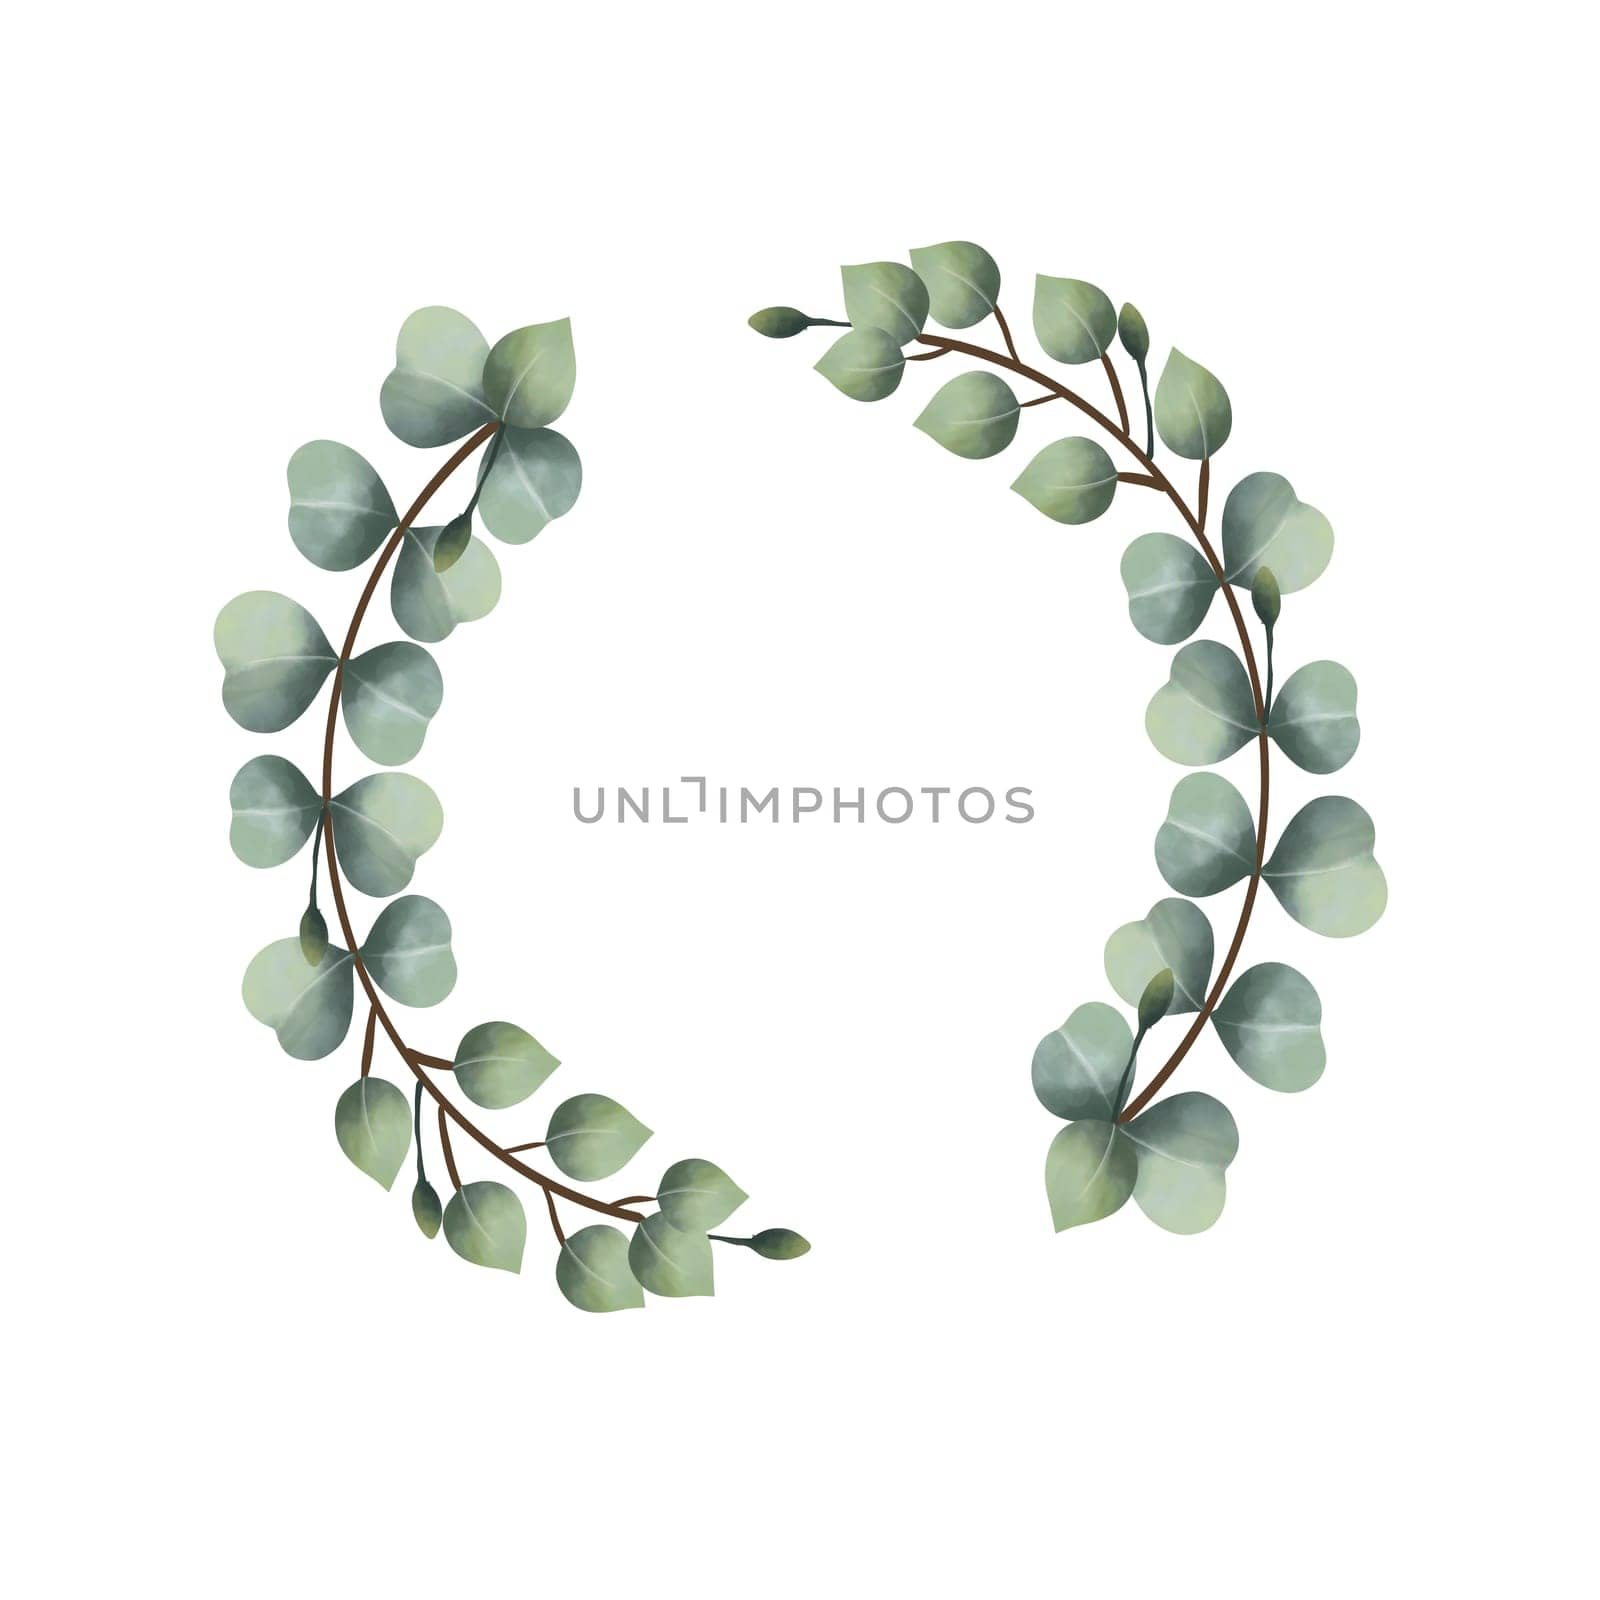 watercolor eucalyptus vines on a white background
Isolated by sarayut_thaneerat